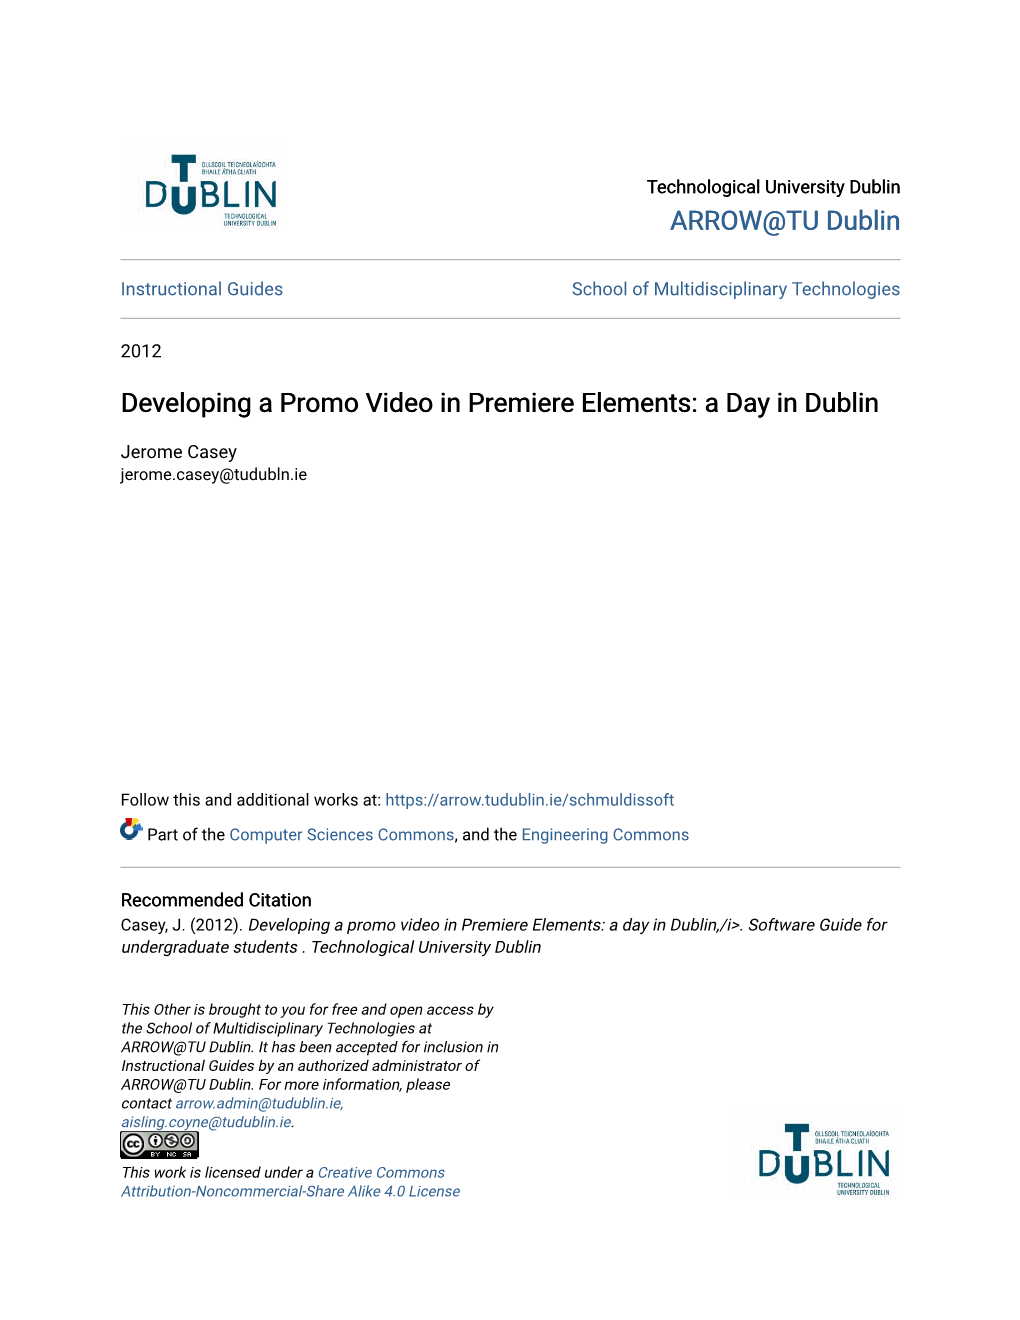 Developing a Promo Video in Premiere Elements: a Day in Dublin